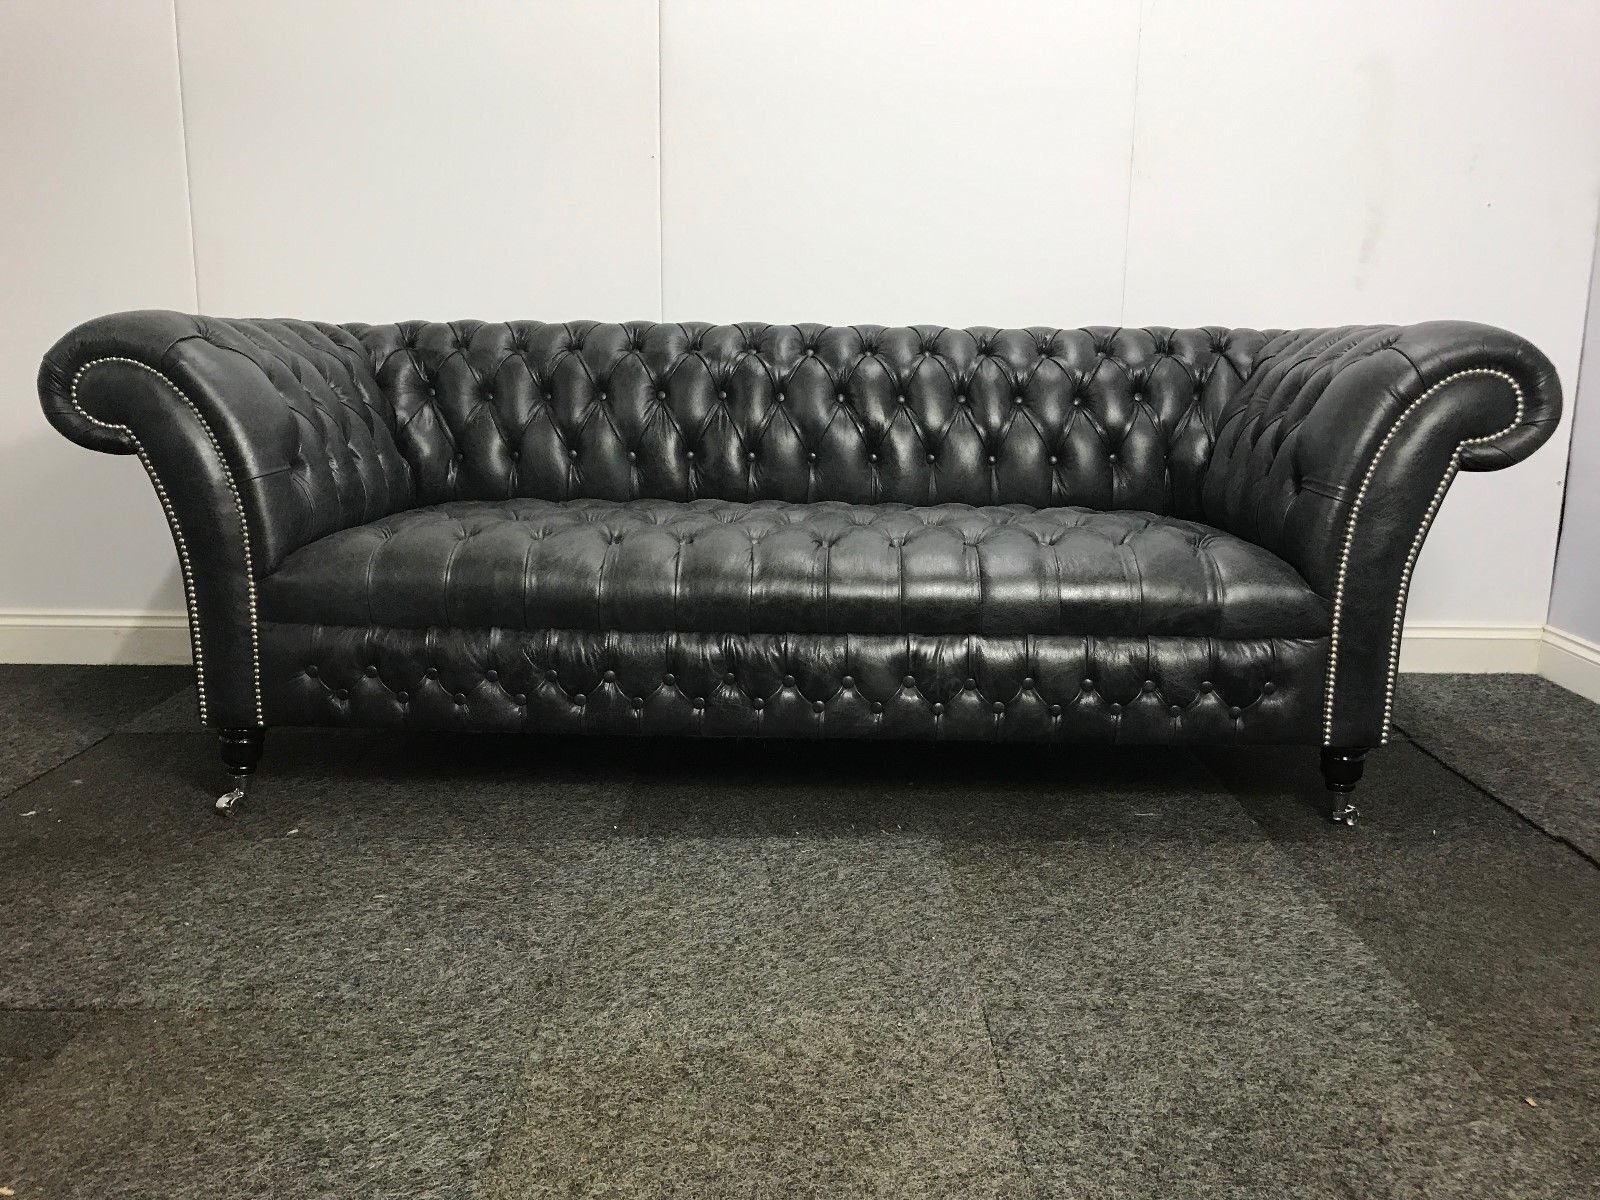 JVmoebel Chesterfield-Sofa Chesterfield Vintage Luxus Sofa Original Couch Sitz 100% Leder Sofort, 1 Teile, Made in Europa